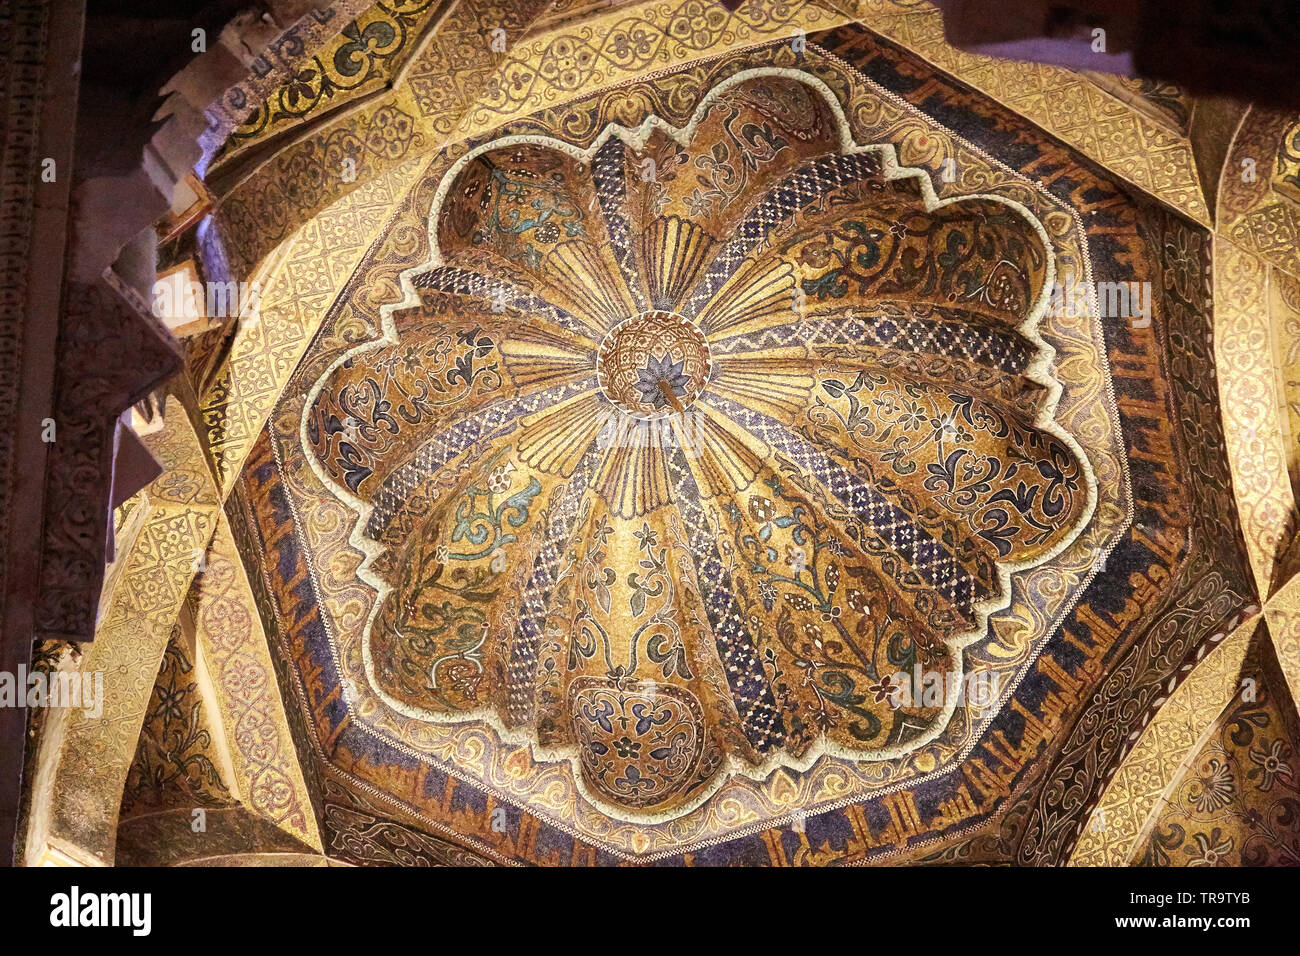 Domed gold and tile ceiling in the Mezquita cathedral mosque in Cordoba, Spain. Stock Photo